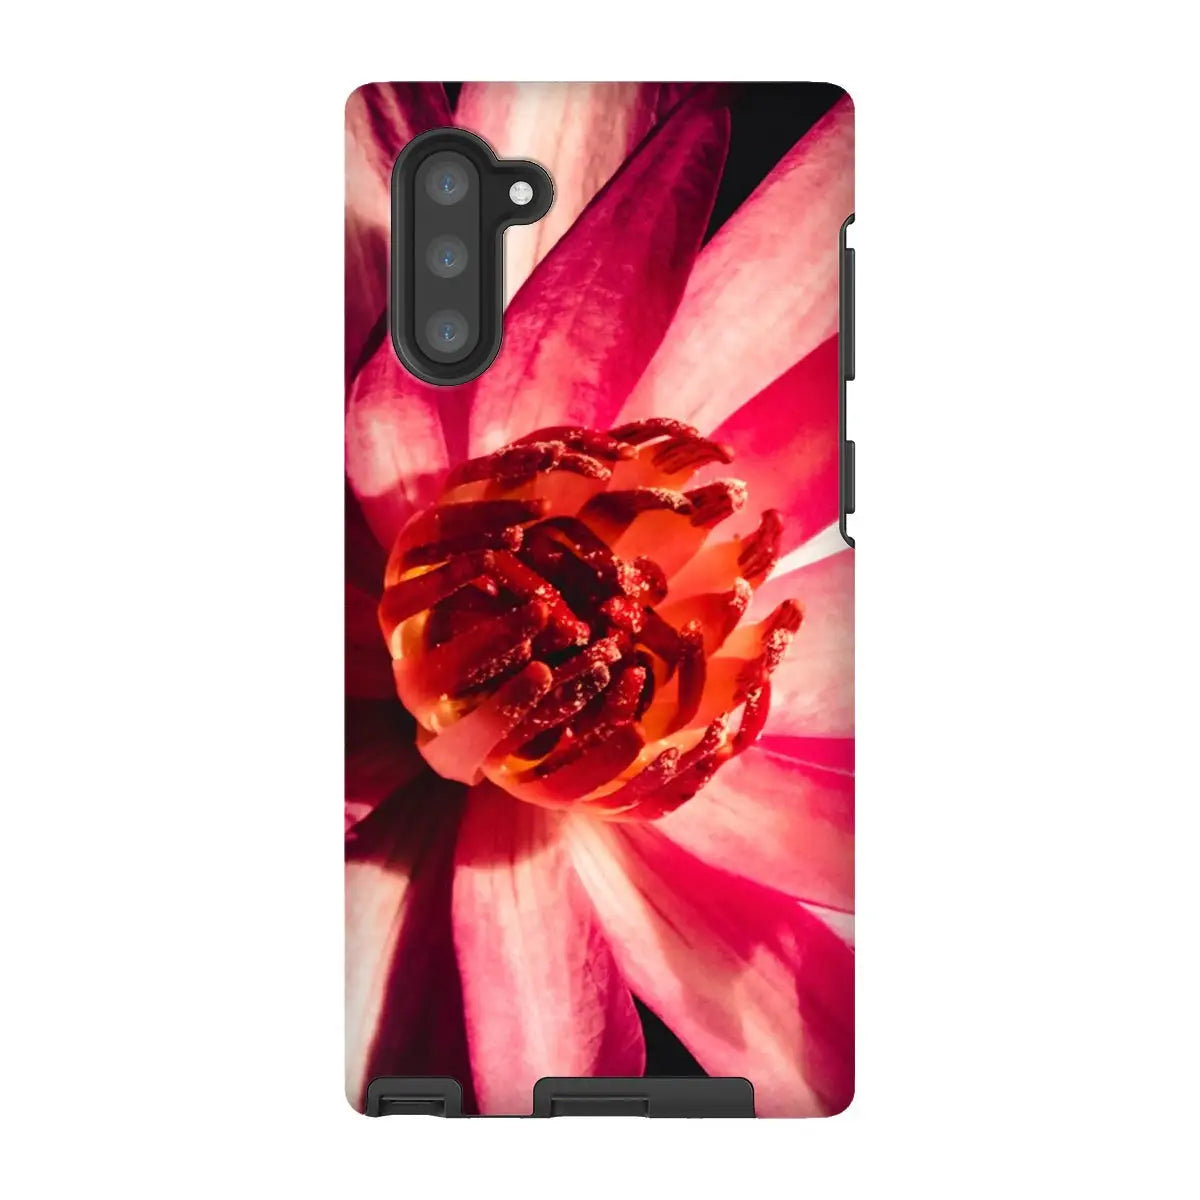 Casanova - Pink Red Lotus Flower Art Photography Phone Case - Samsung Galaxy Note 10 / Matte - Mobile Phone Cases